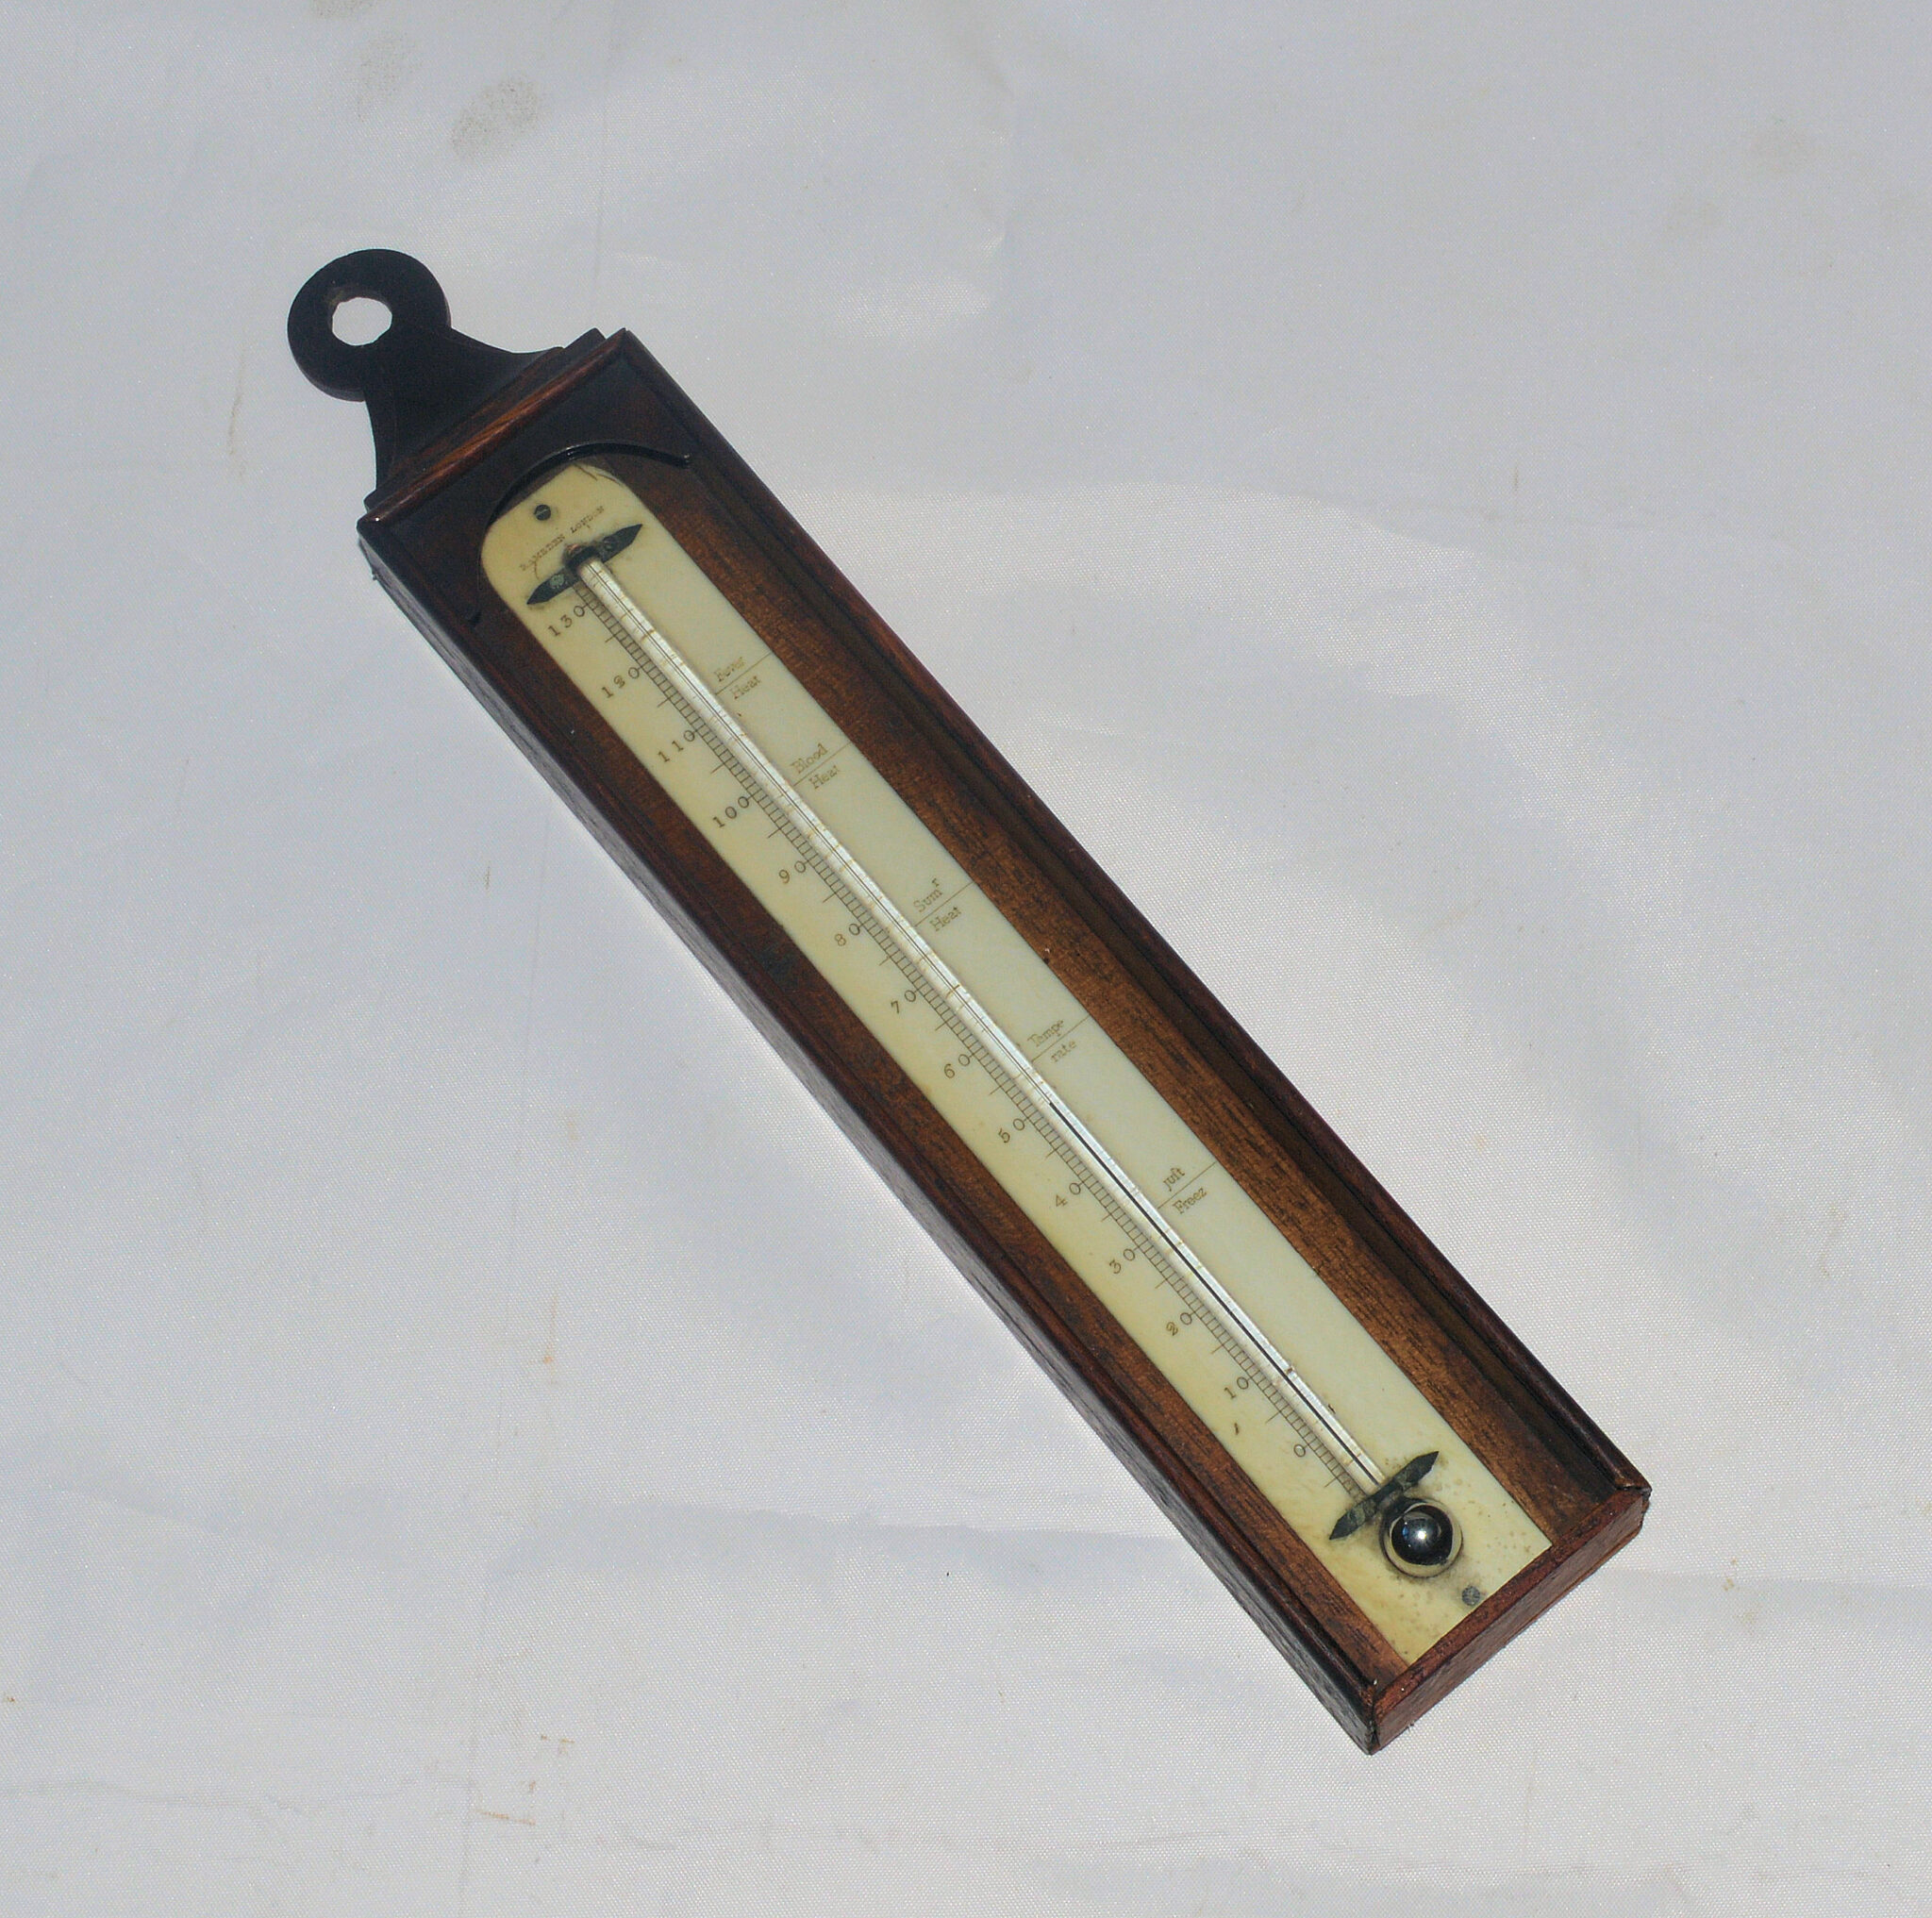 Wall Thermometer by Ramsden.